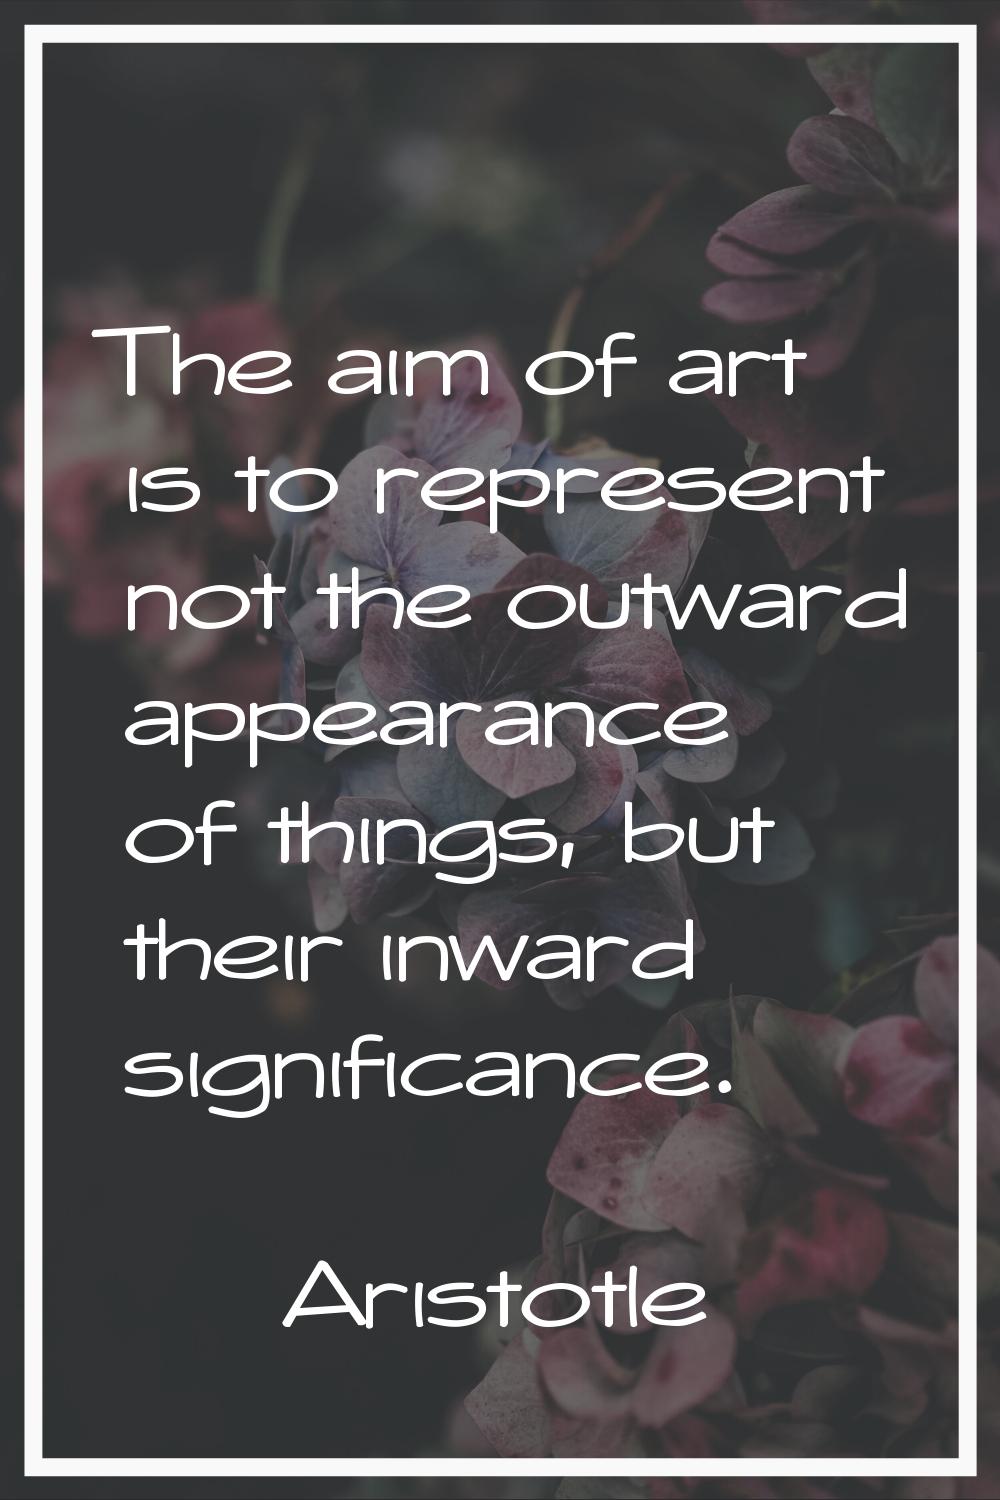 The aim of art is to represent not the outward appearance of things, but their inward significance.